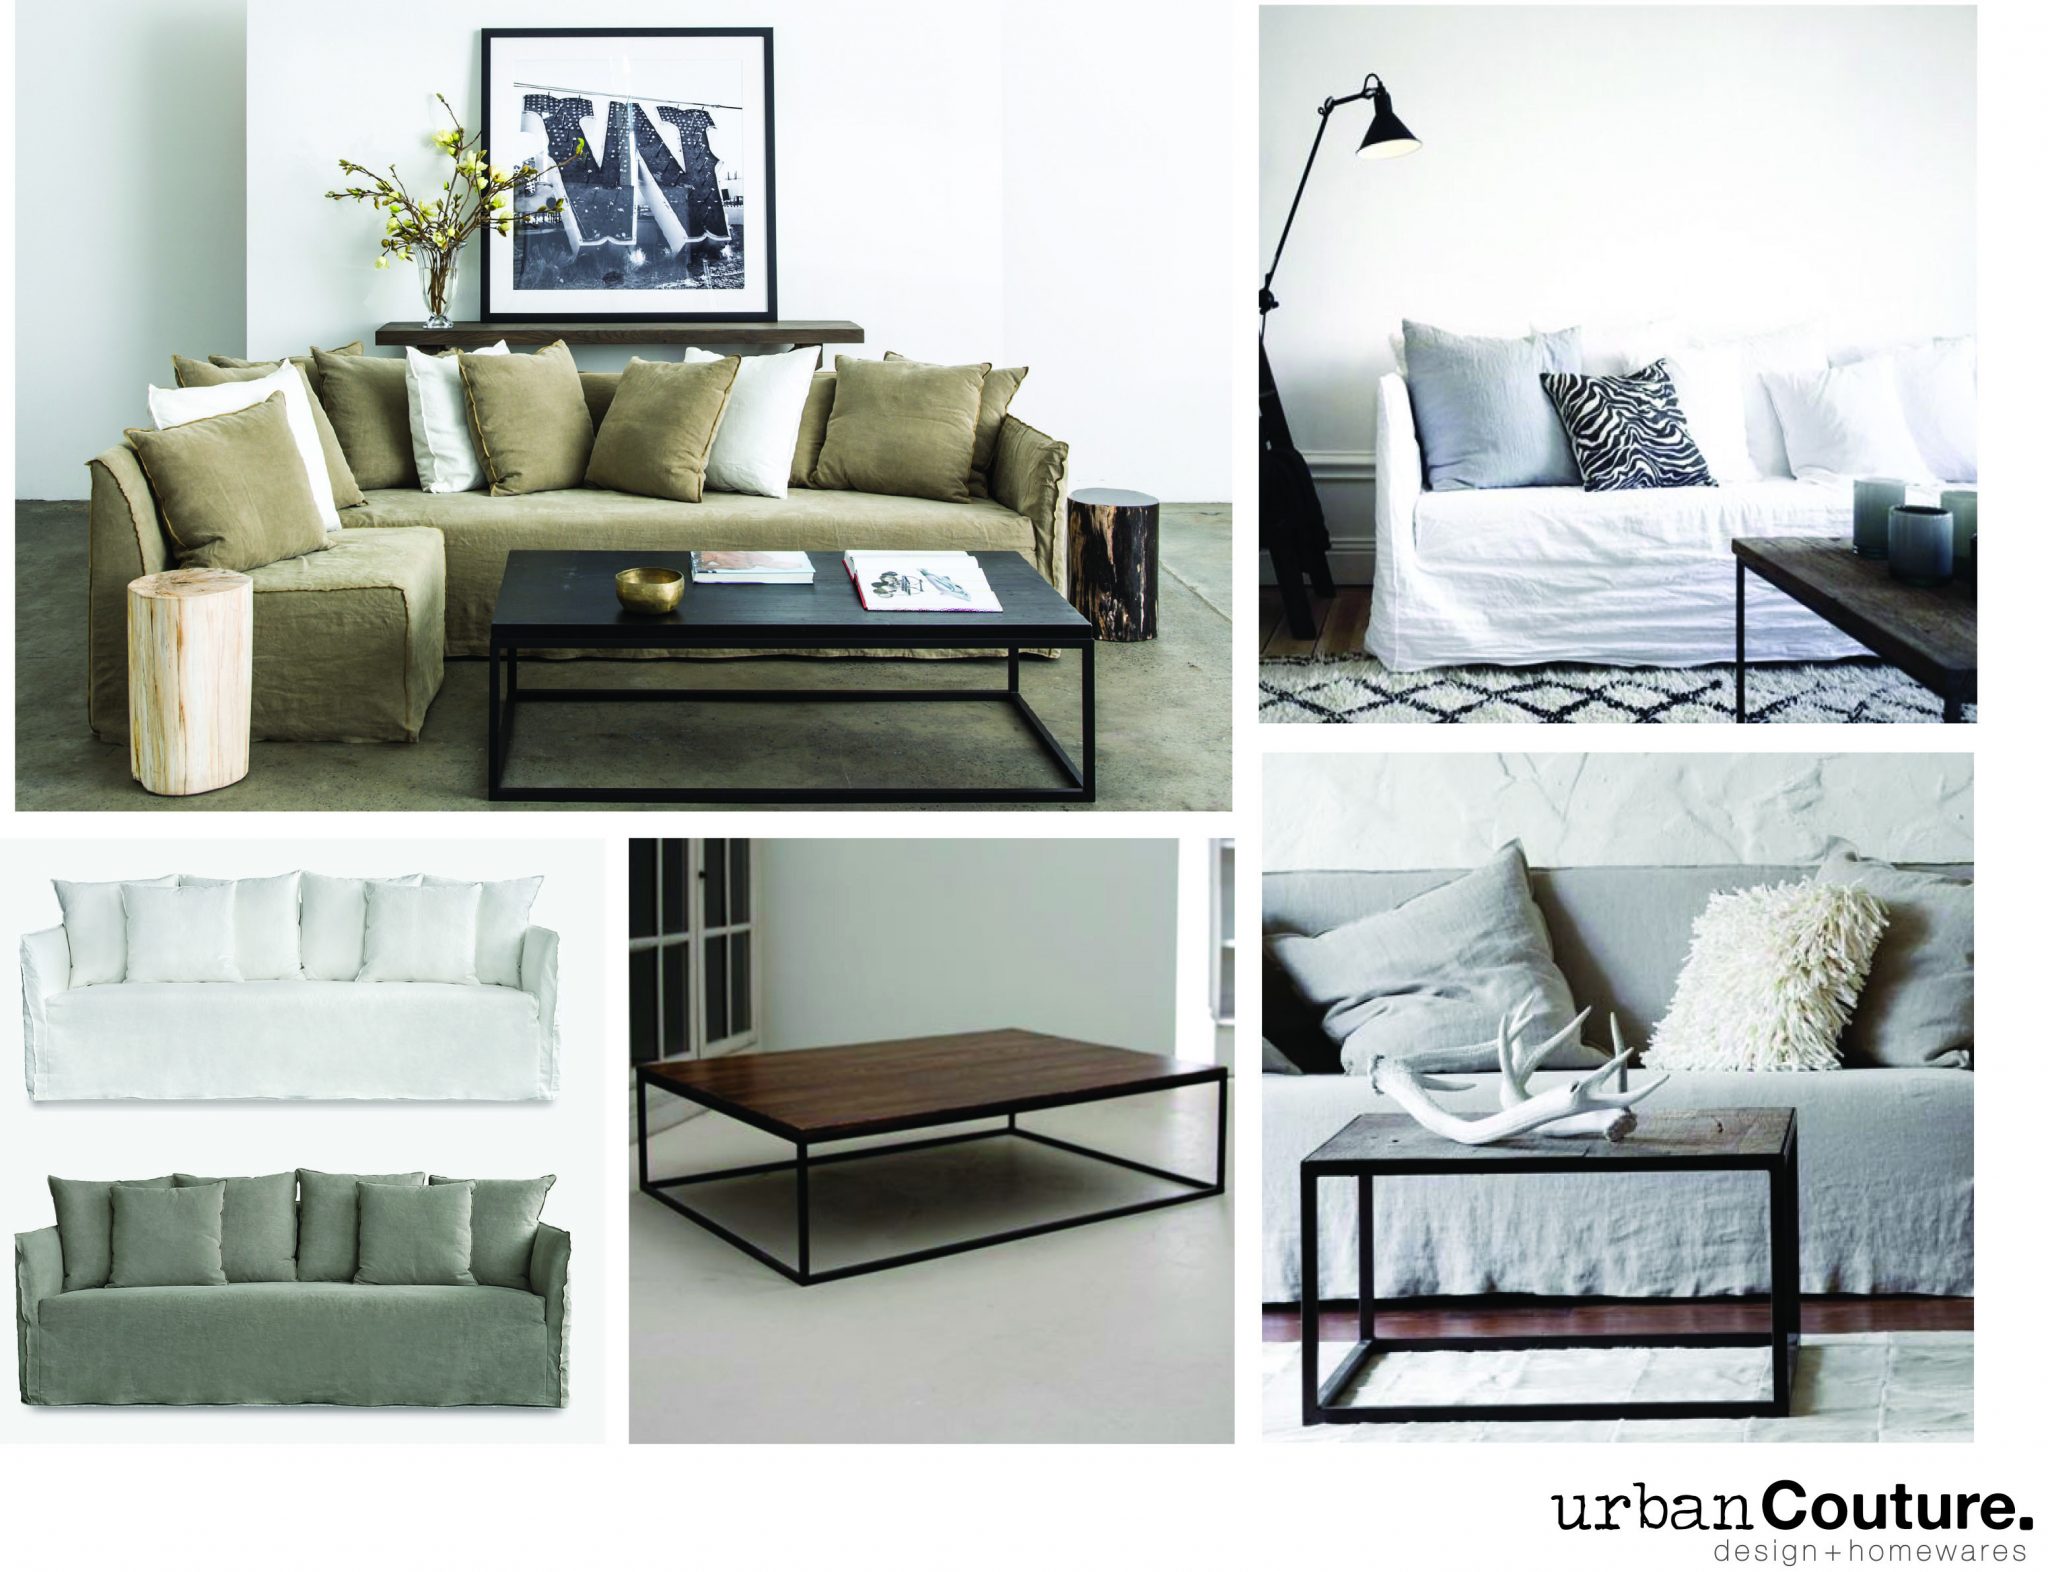 MCM House furniture and homewares available to buy online at Urban Couture